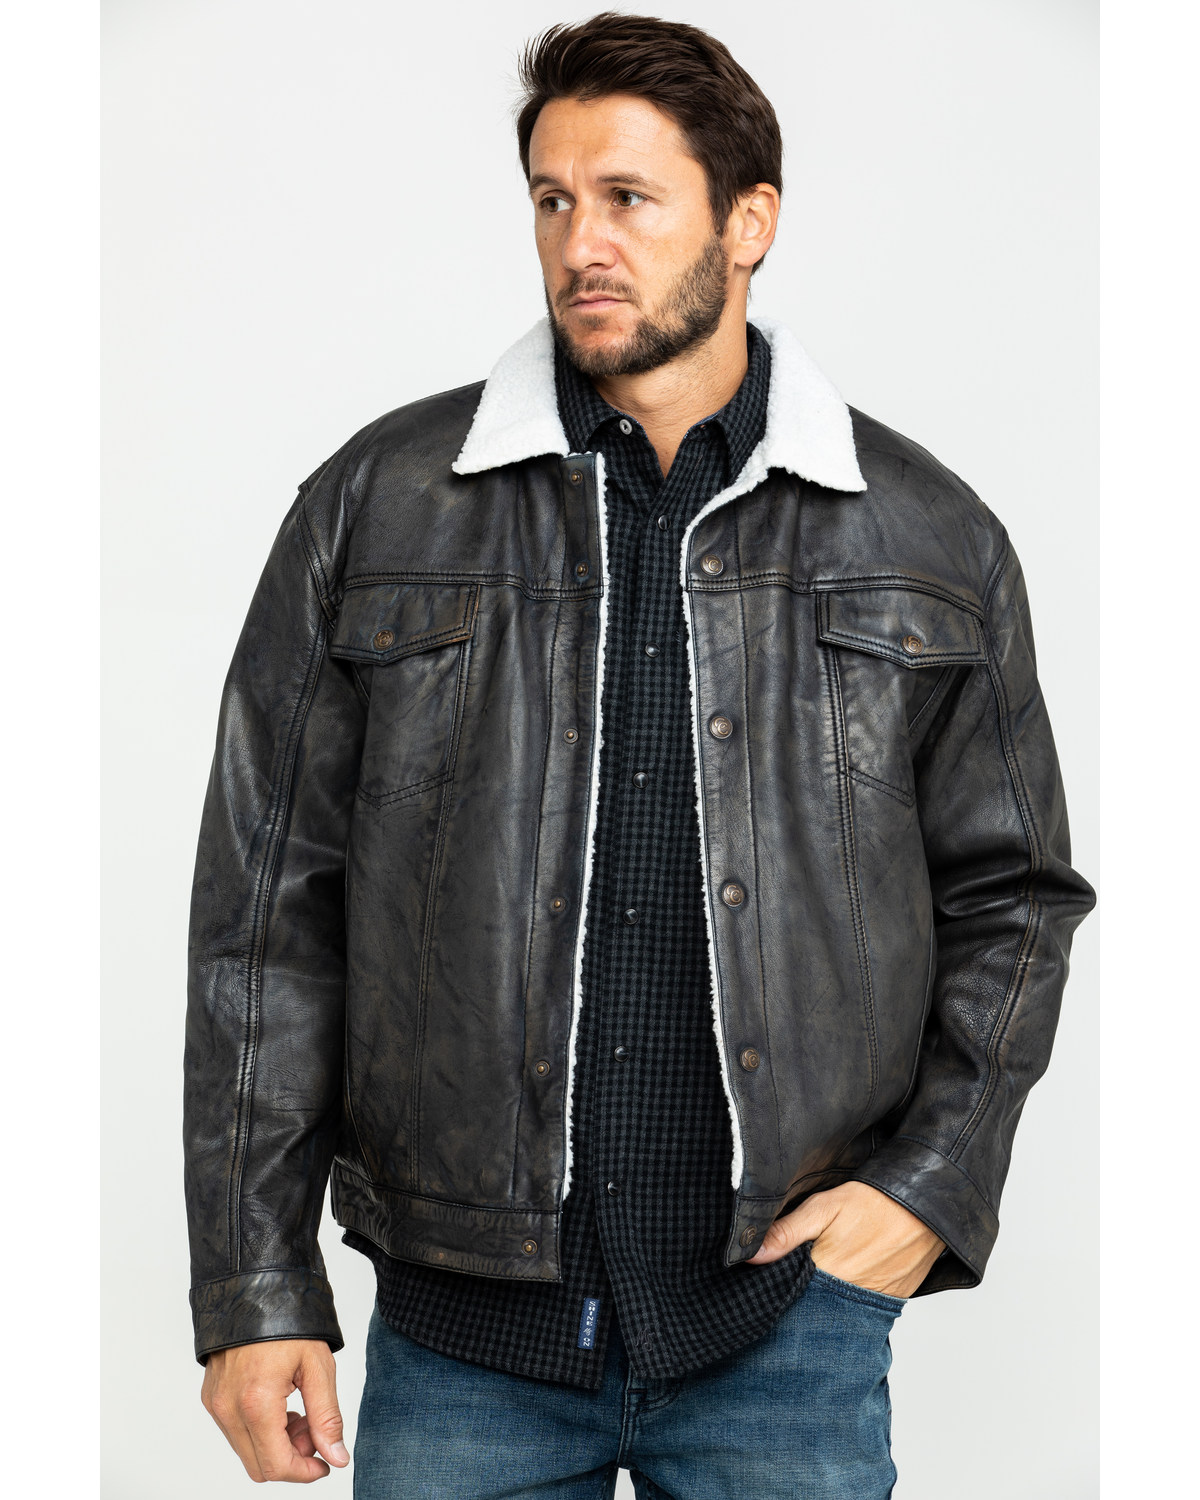 Cripple Creek Men's Concealed Carry Sherpa Lined Leather Jacket